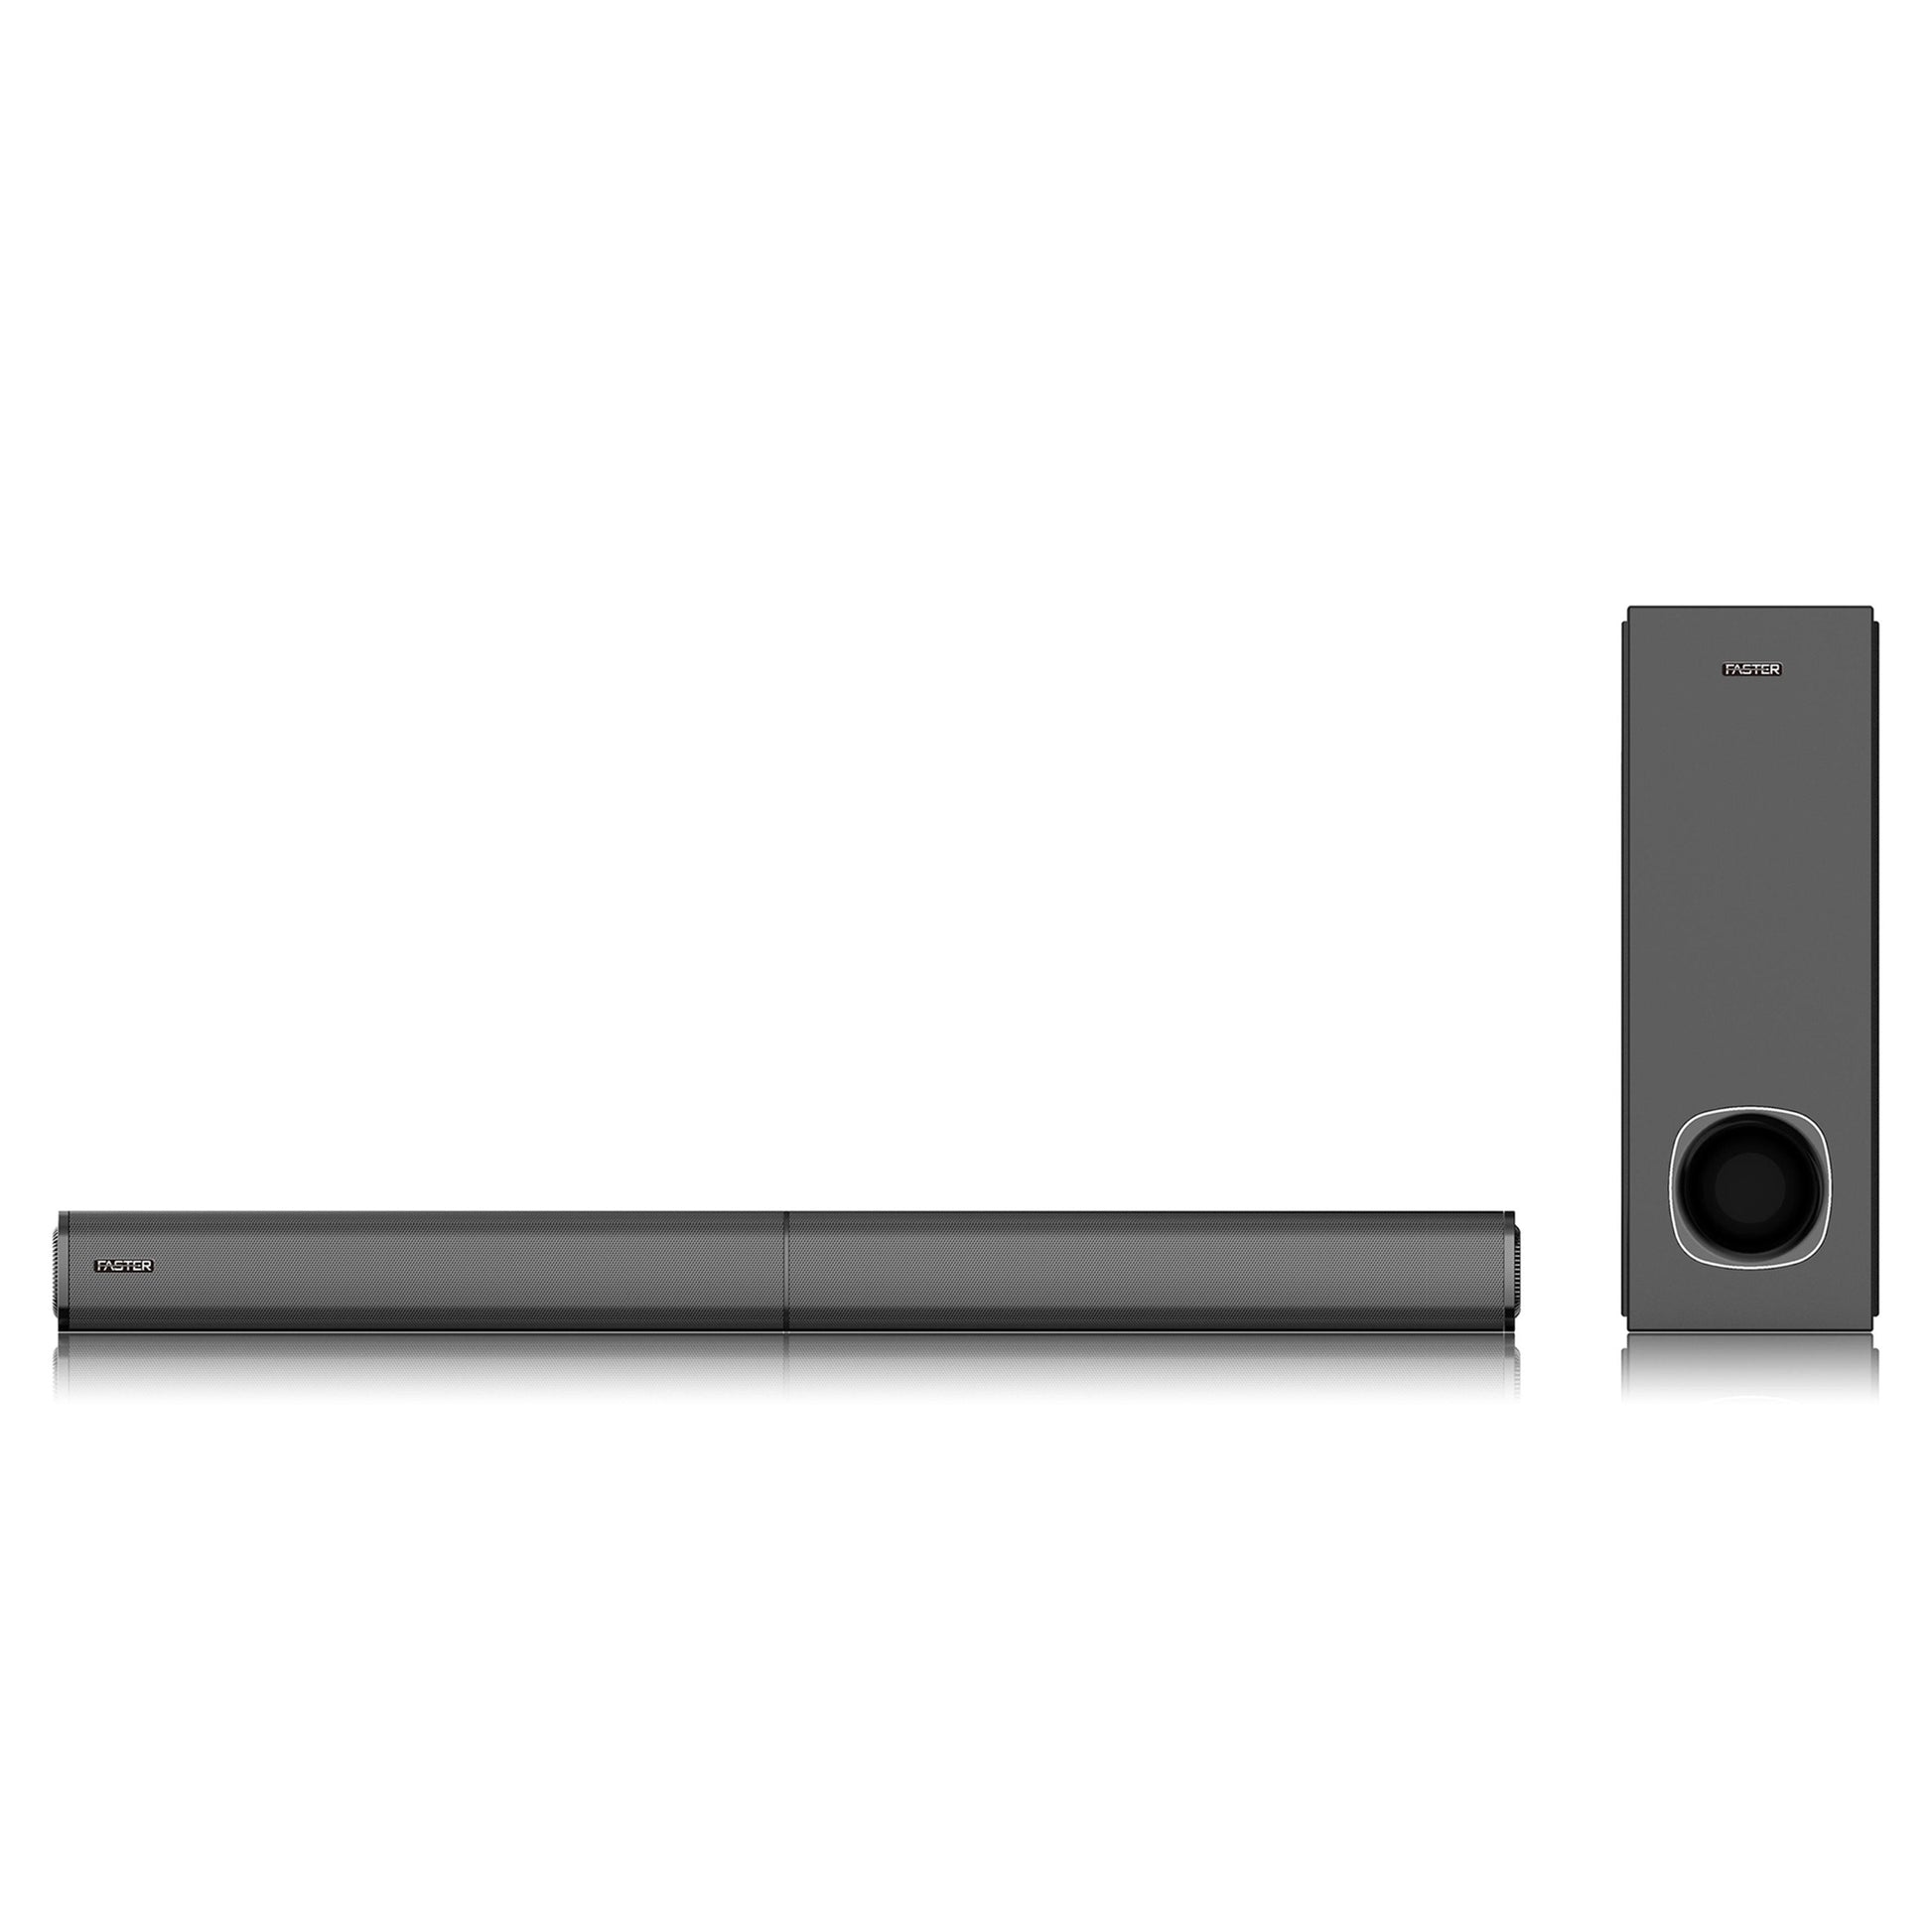 A front side view of Faster XB7000 soundbar with subwoofer on white background